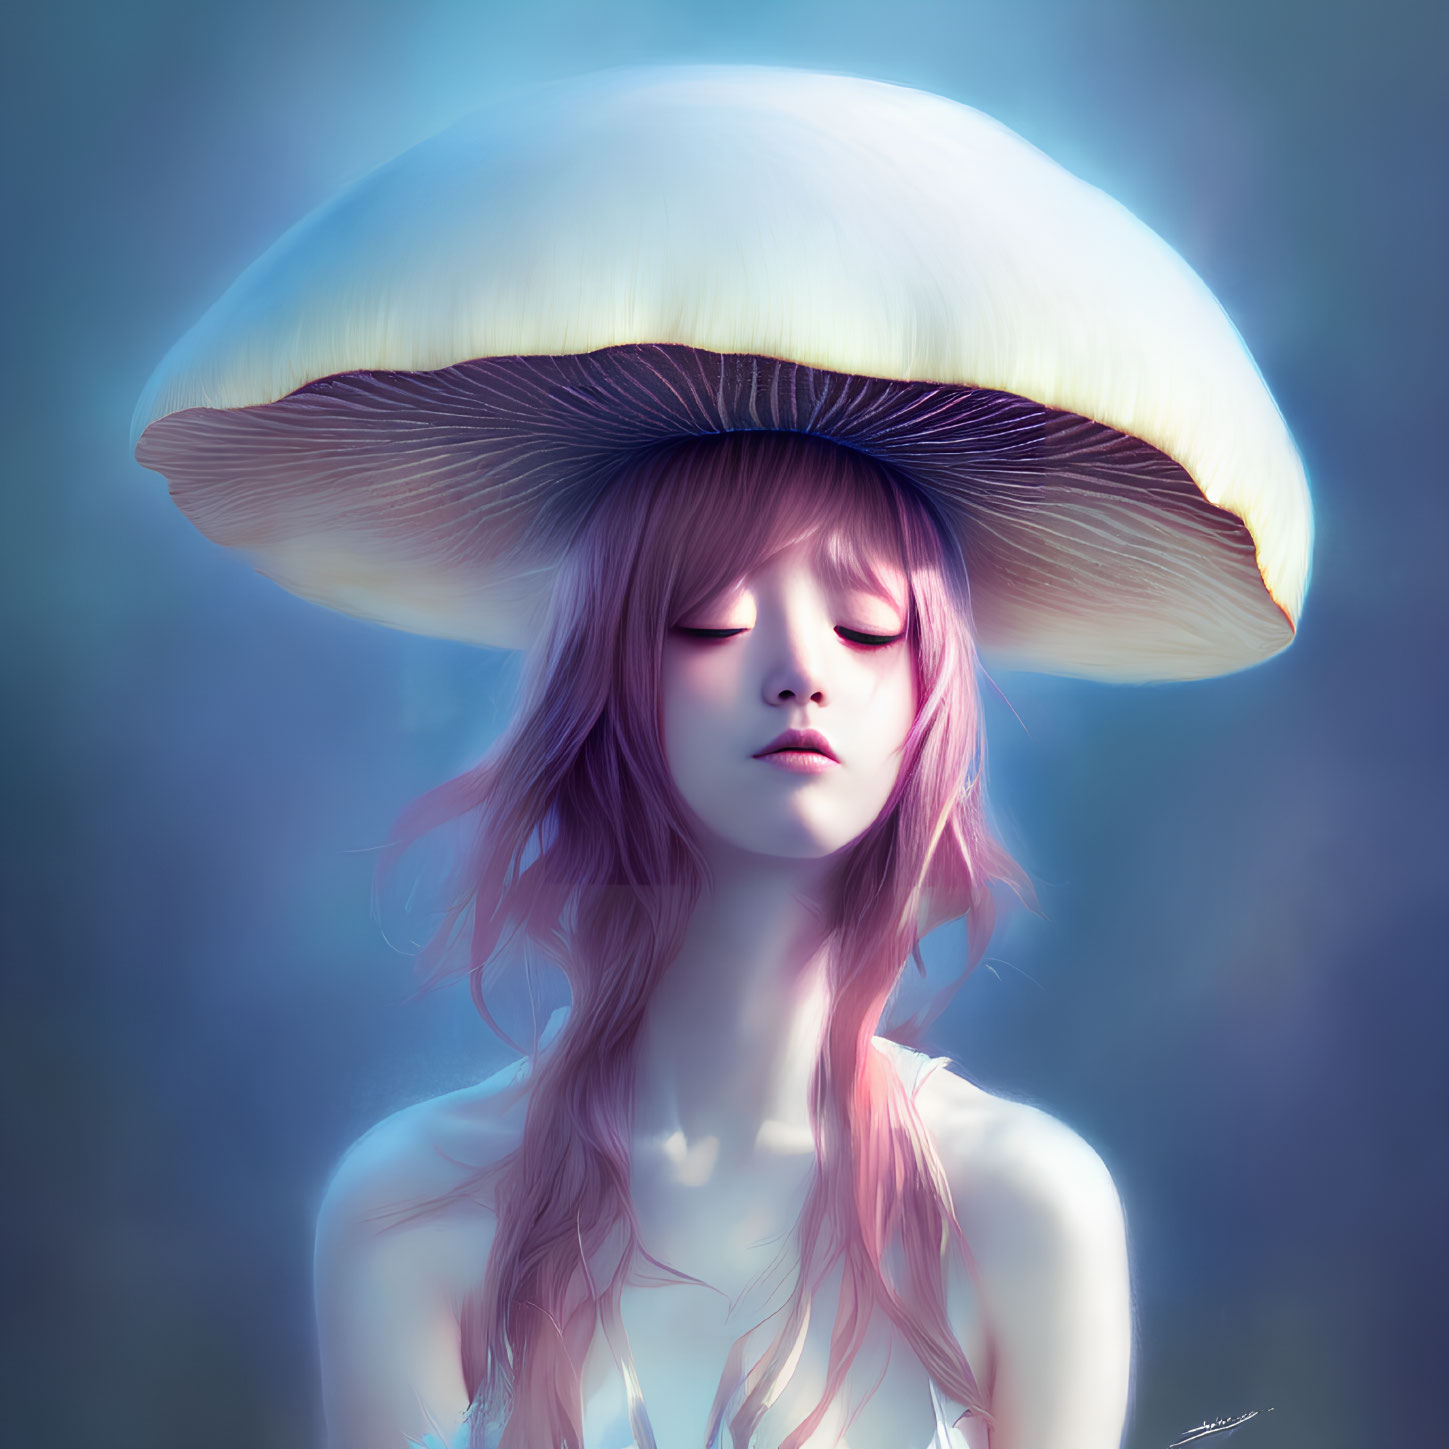 Illustration of woman with mushroom hat and pink hair on blue background